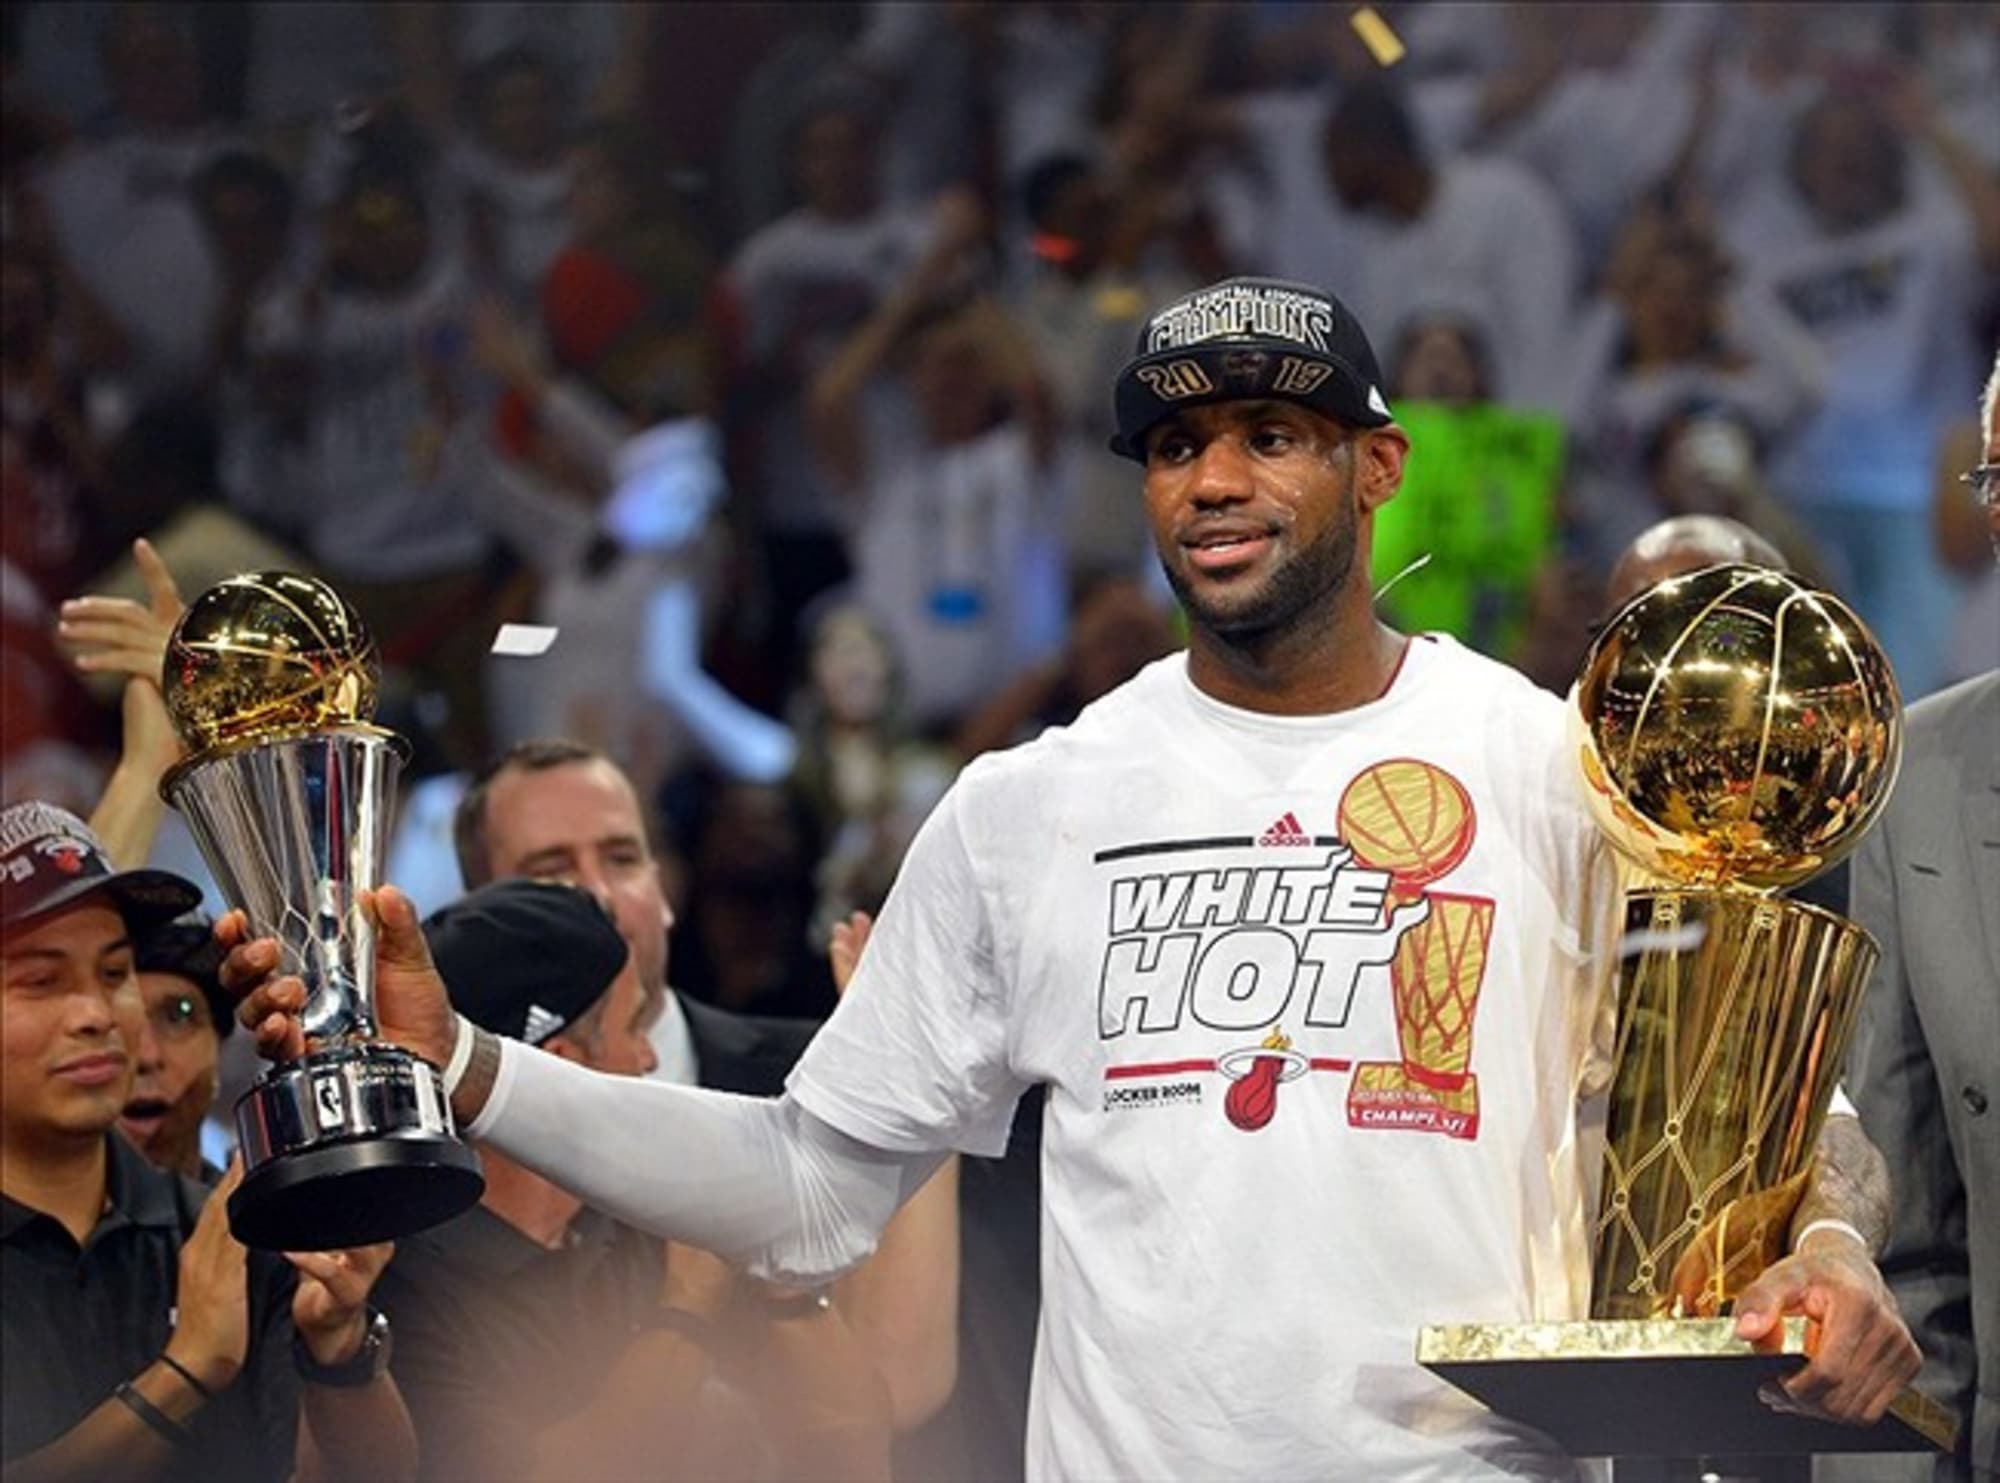 Lebron James winning Championship in 2013 with Miami Heat.